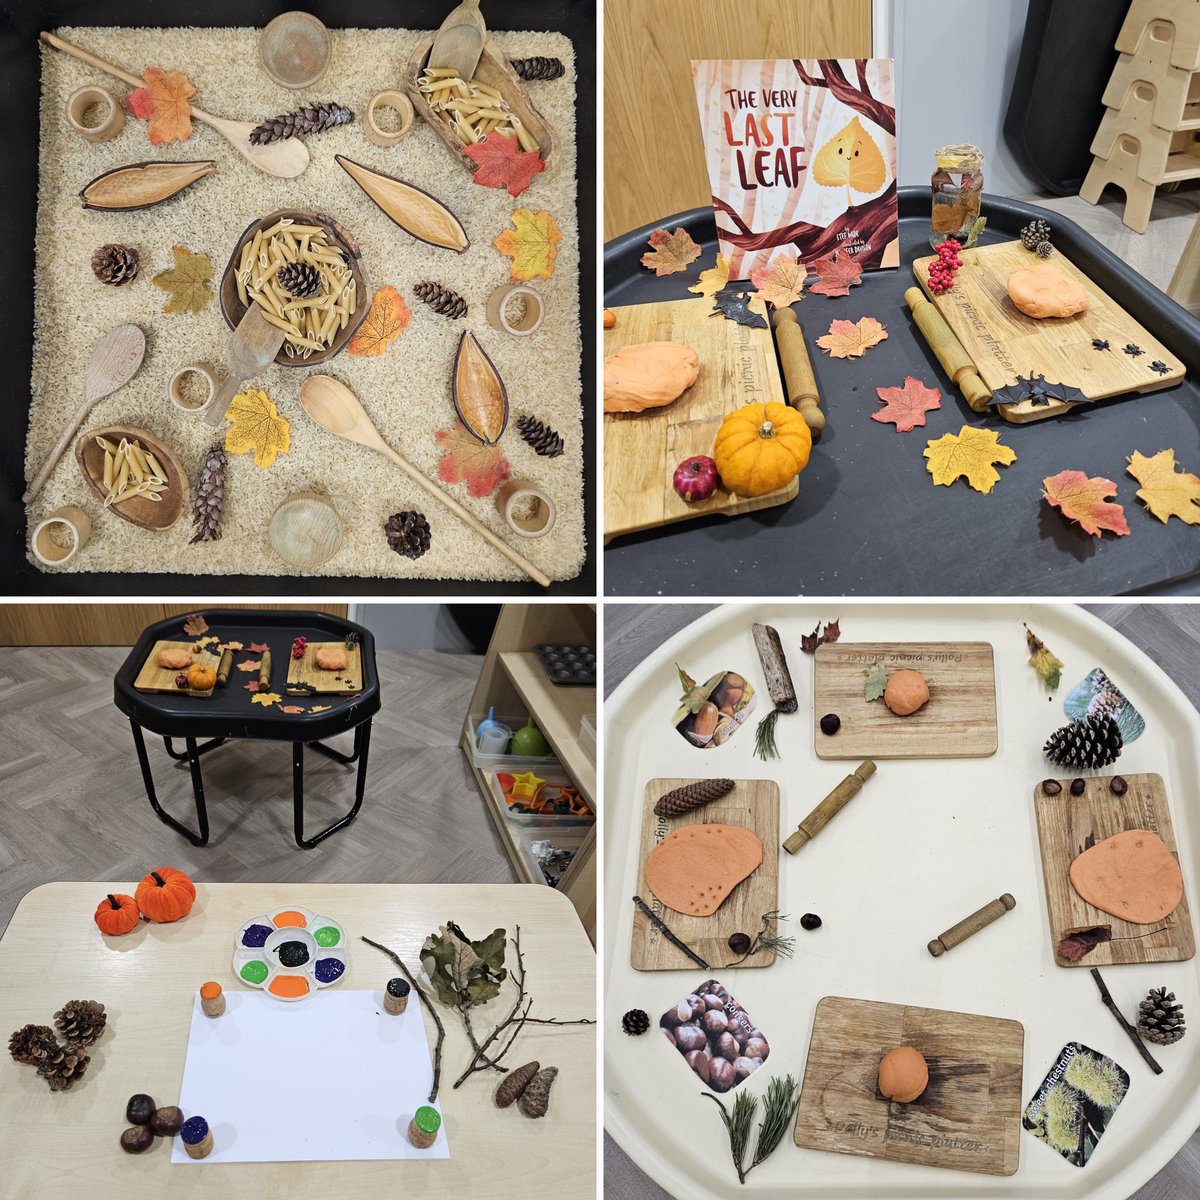 Another stunning album of  #autumn enhancements to our #continuousprovision 

#eyfs #halloween #nature #heuristicplay #tufftray #tuffspot #education #earlyeducation #learningthroughplay #pollysprivatedaynursery